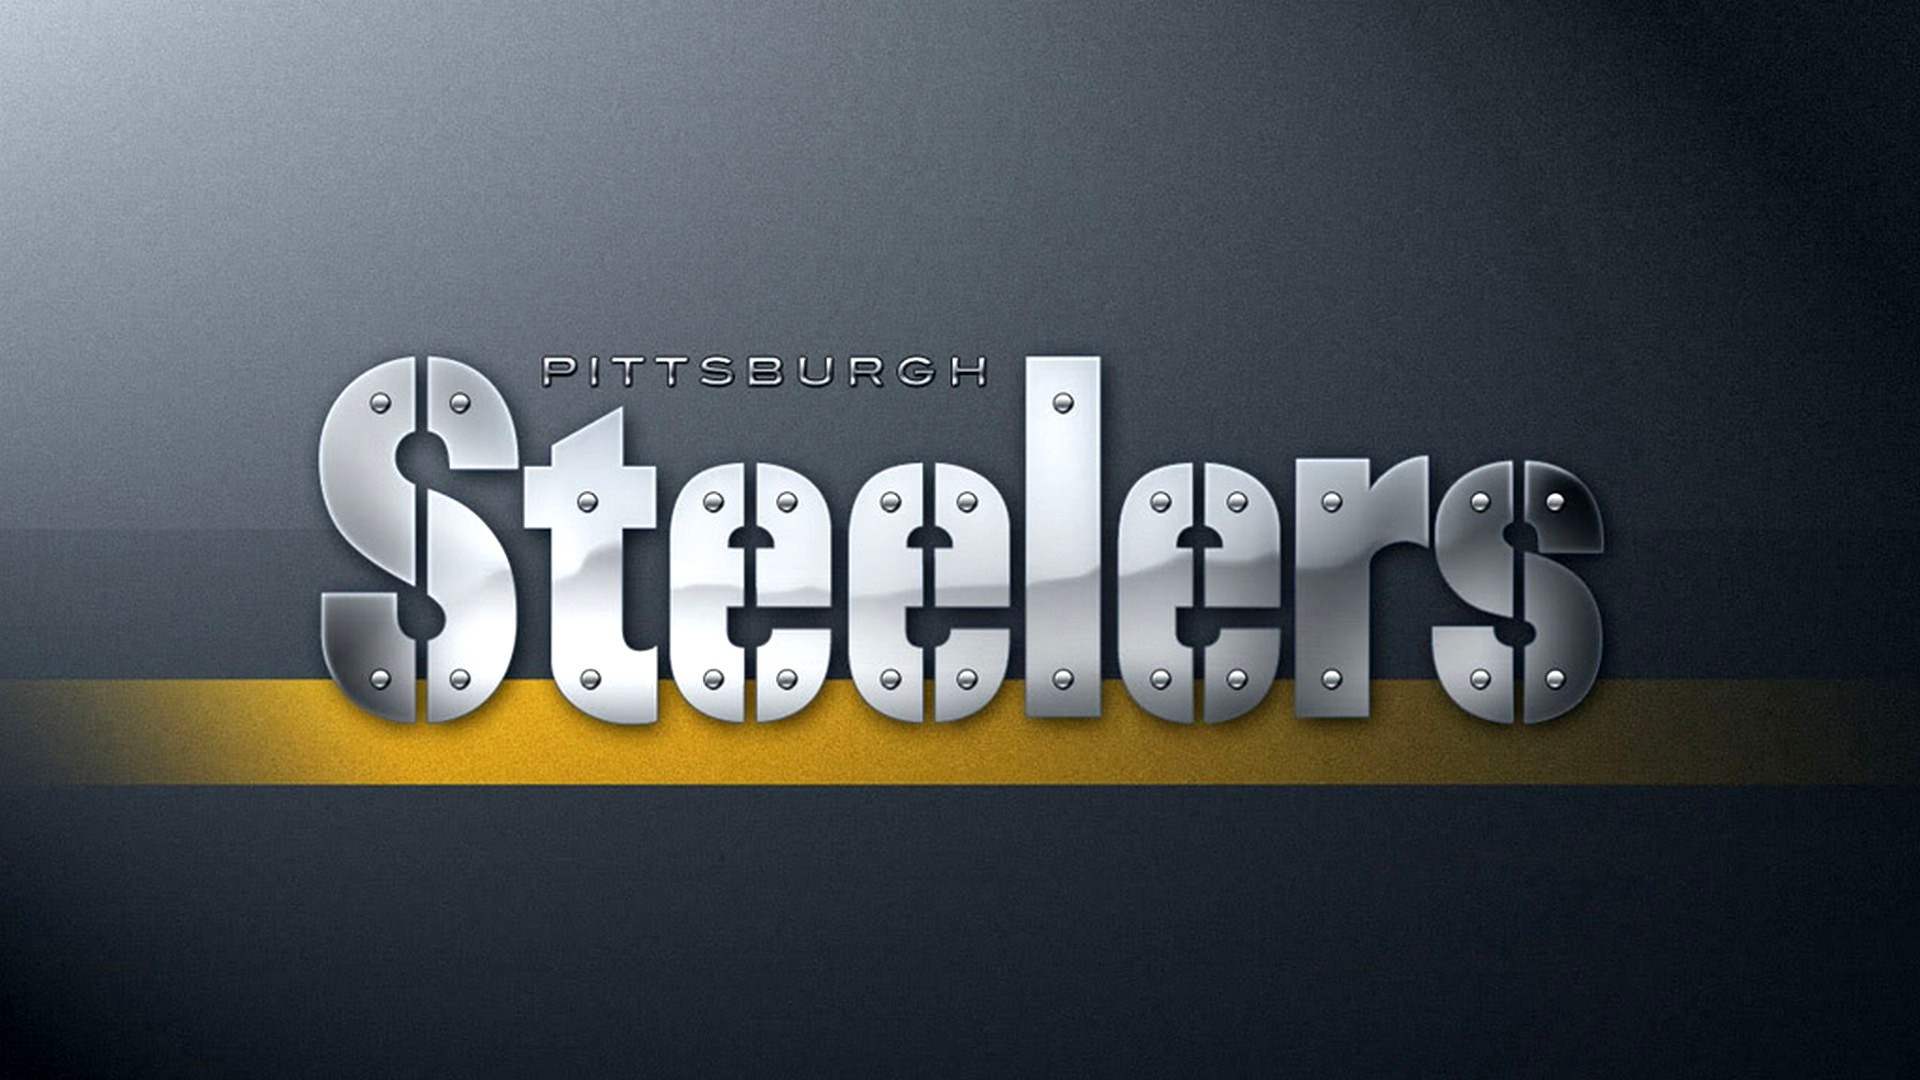 Best Steelers Wallpaper in HD with high-resolution 1920x1080 pixel. You can use and set as wallpaper for Notebook Screensavers, Mac Wallpapers, Mobile Home Screen, iPhone or Android Phones Lock Screen